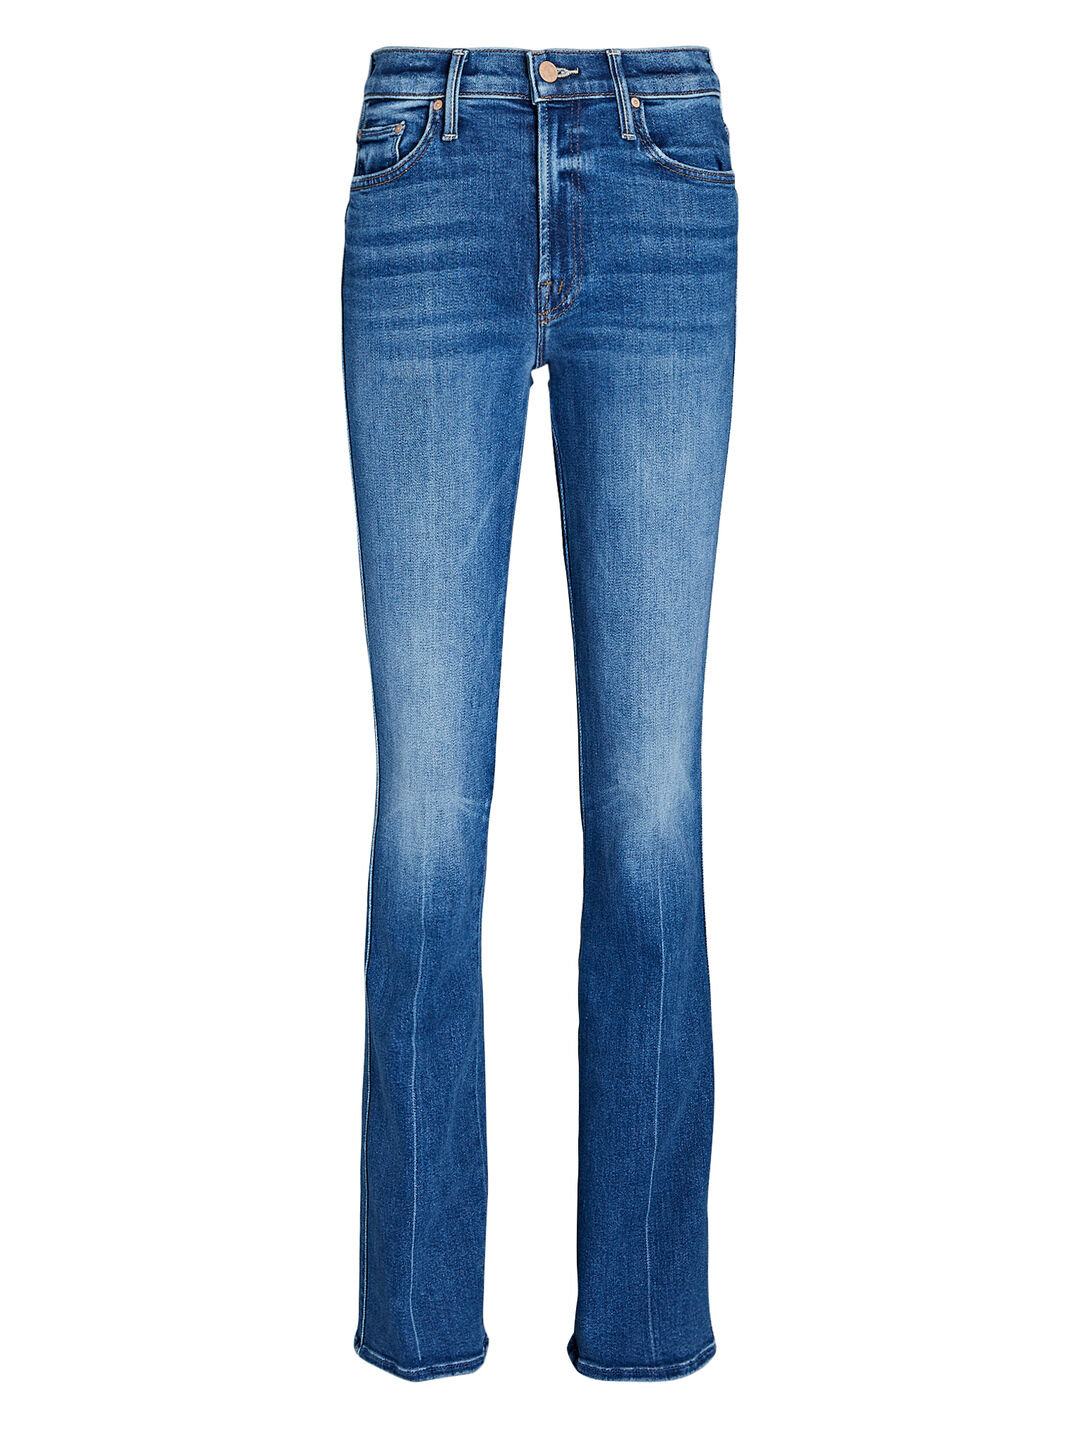 The Double Insider Heel Bootcut Jeans